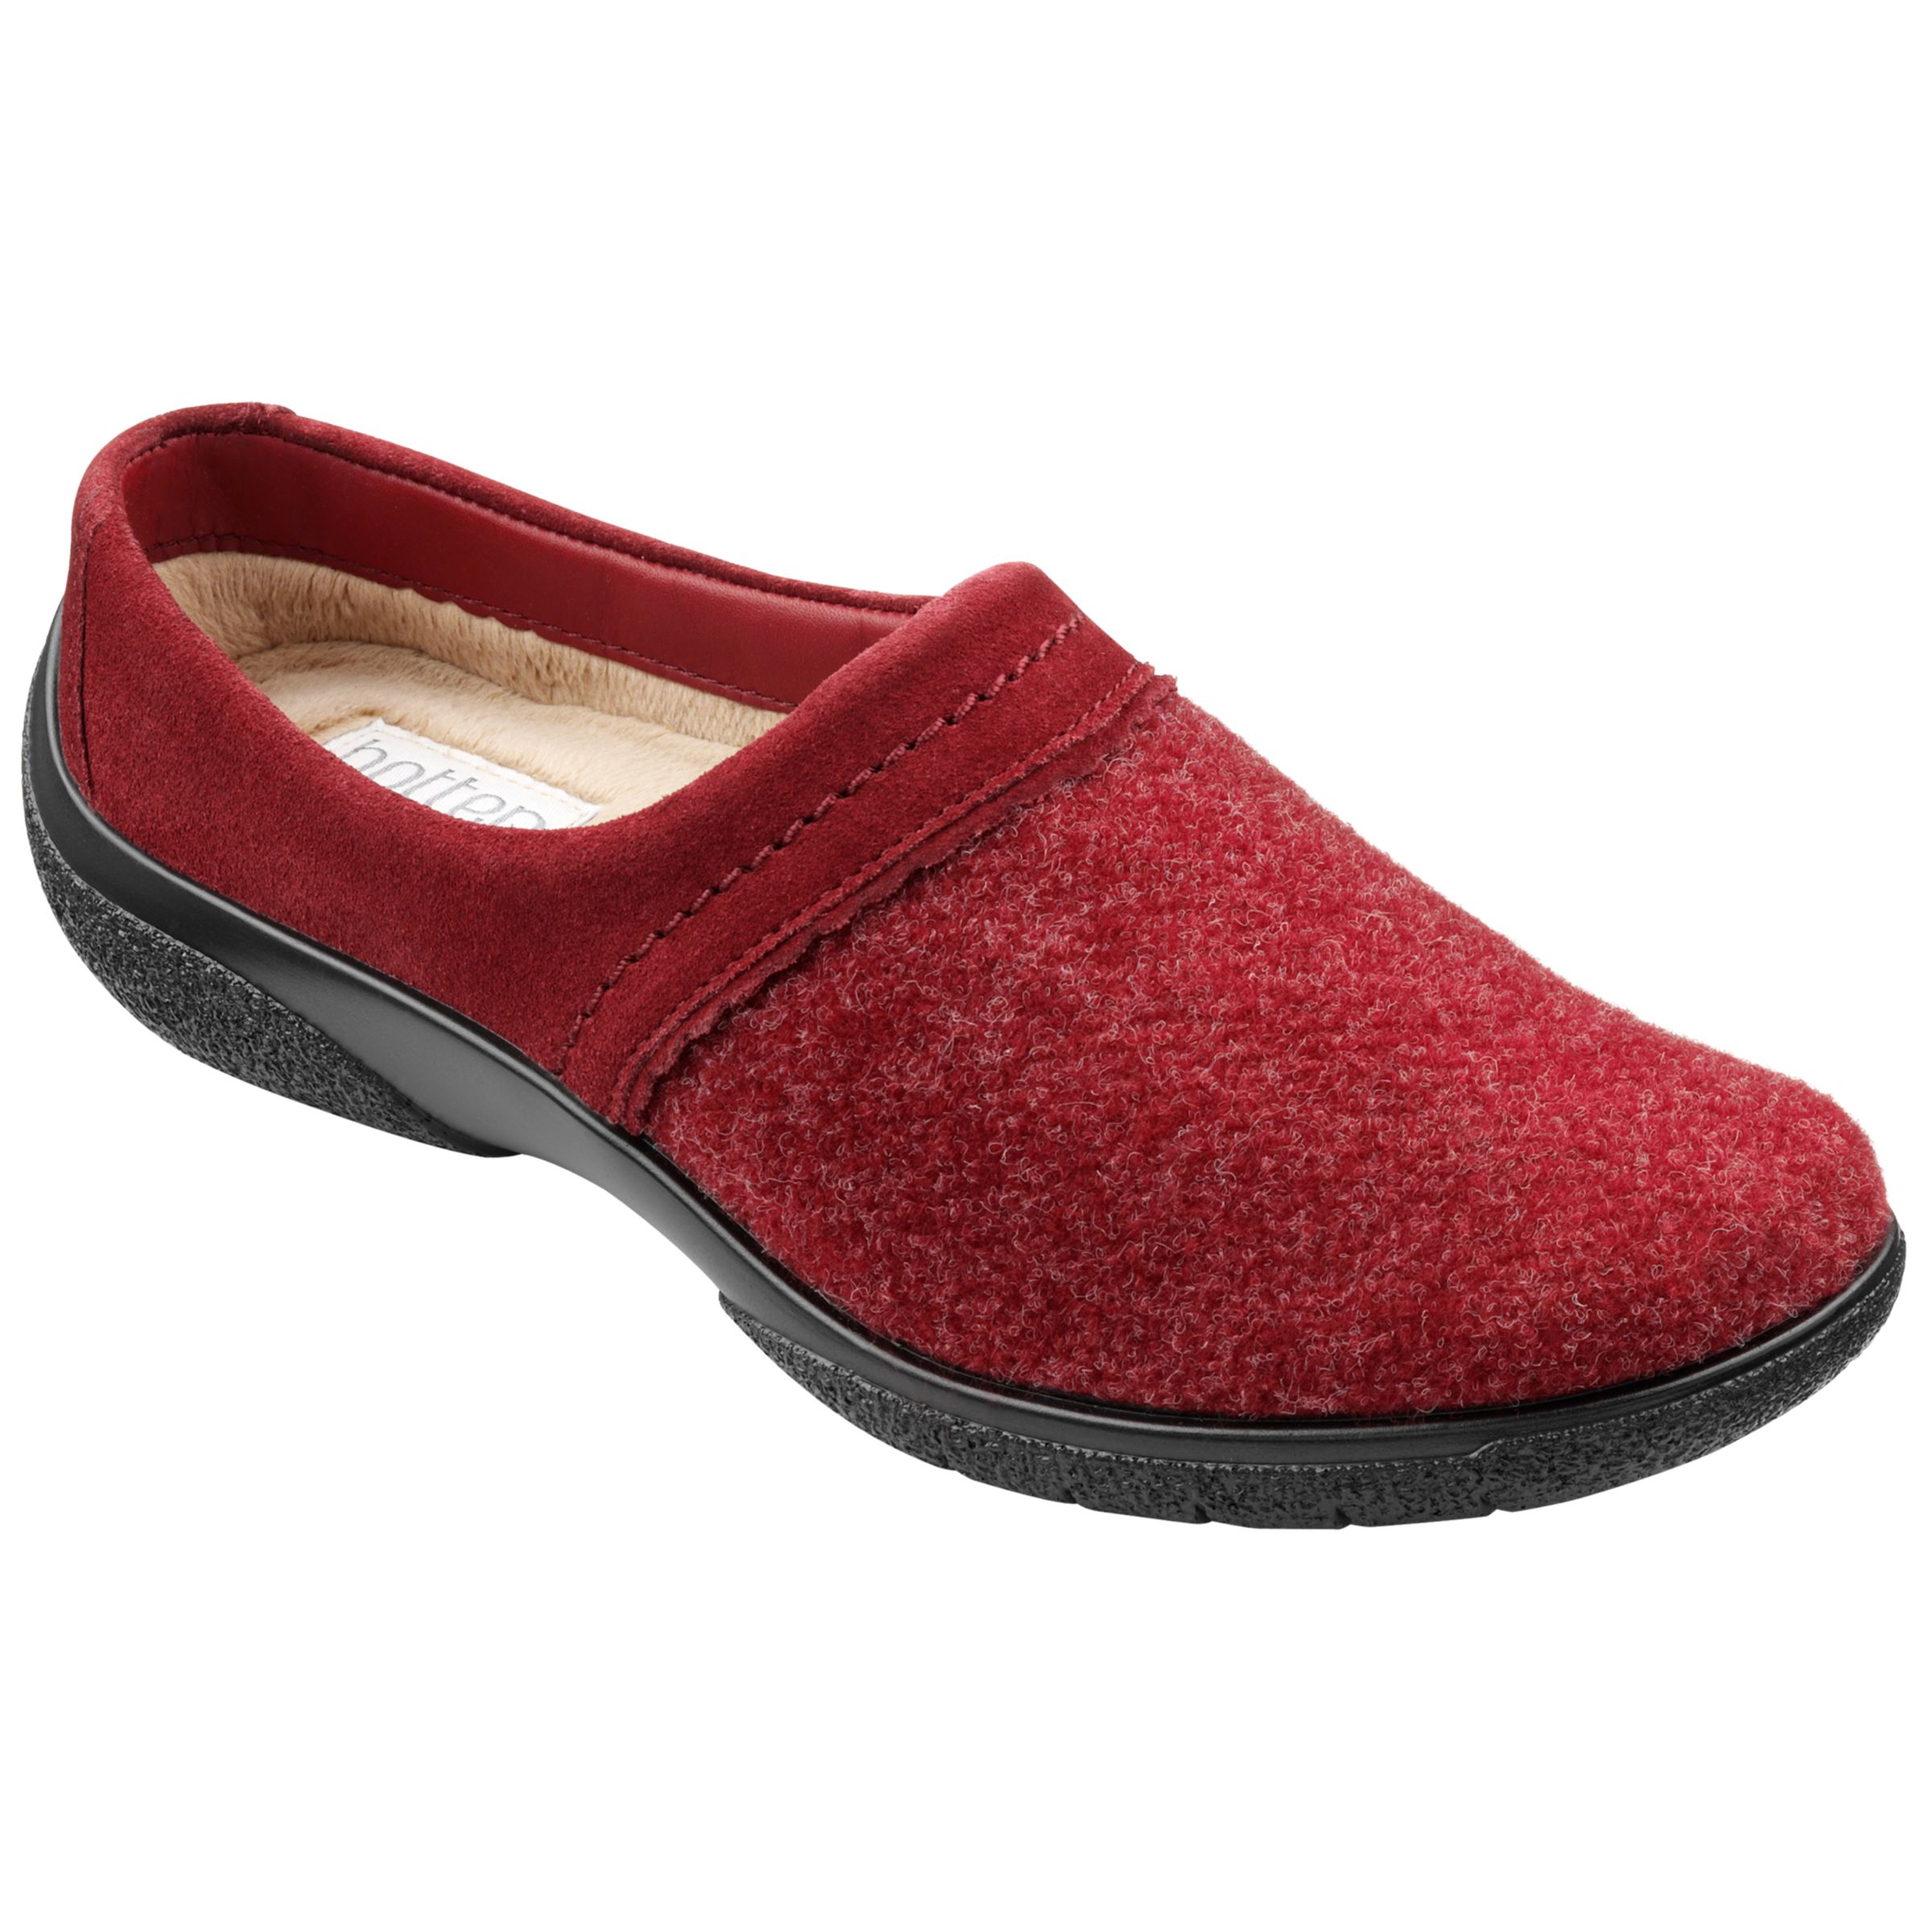 Hotter Devotion Textured Slippers, Ruby